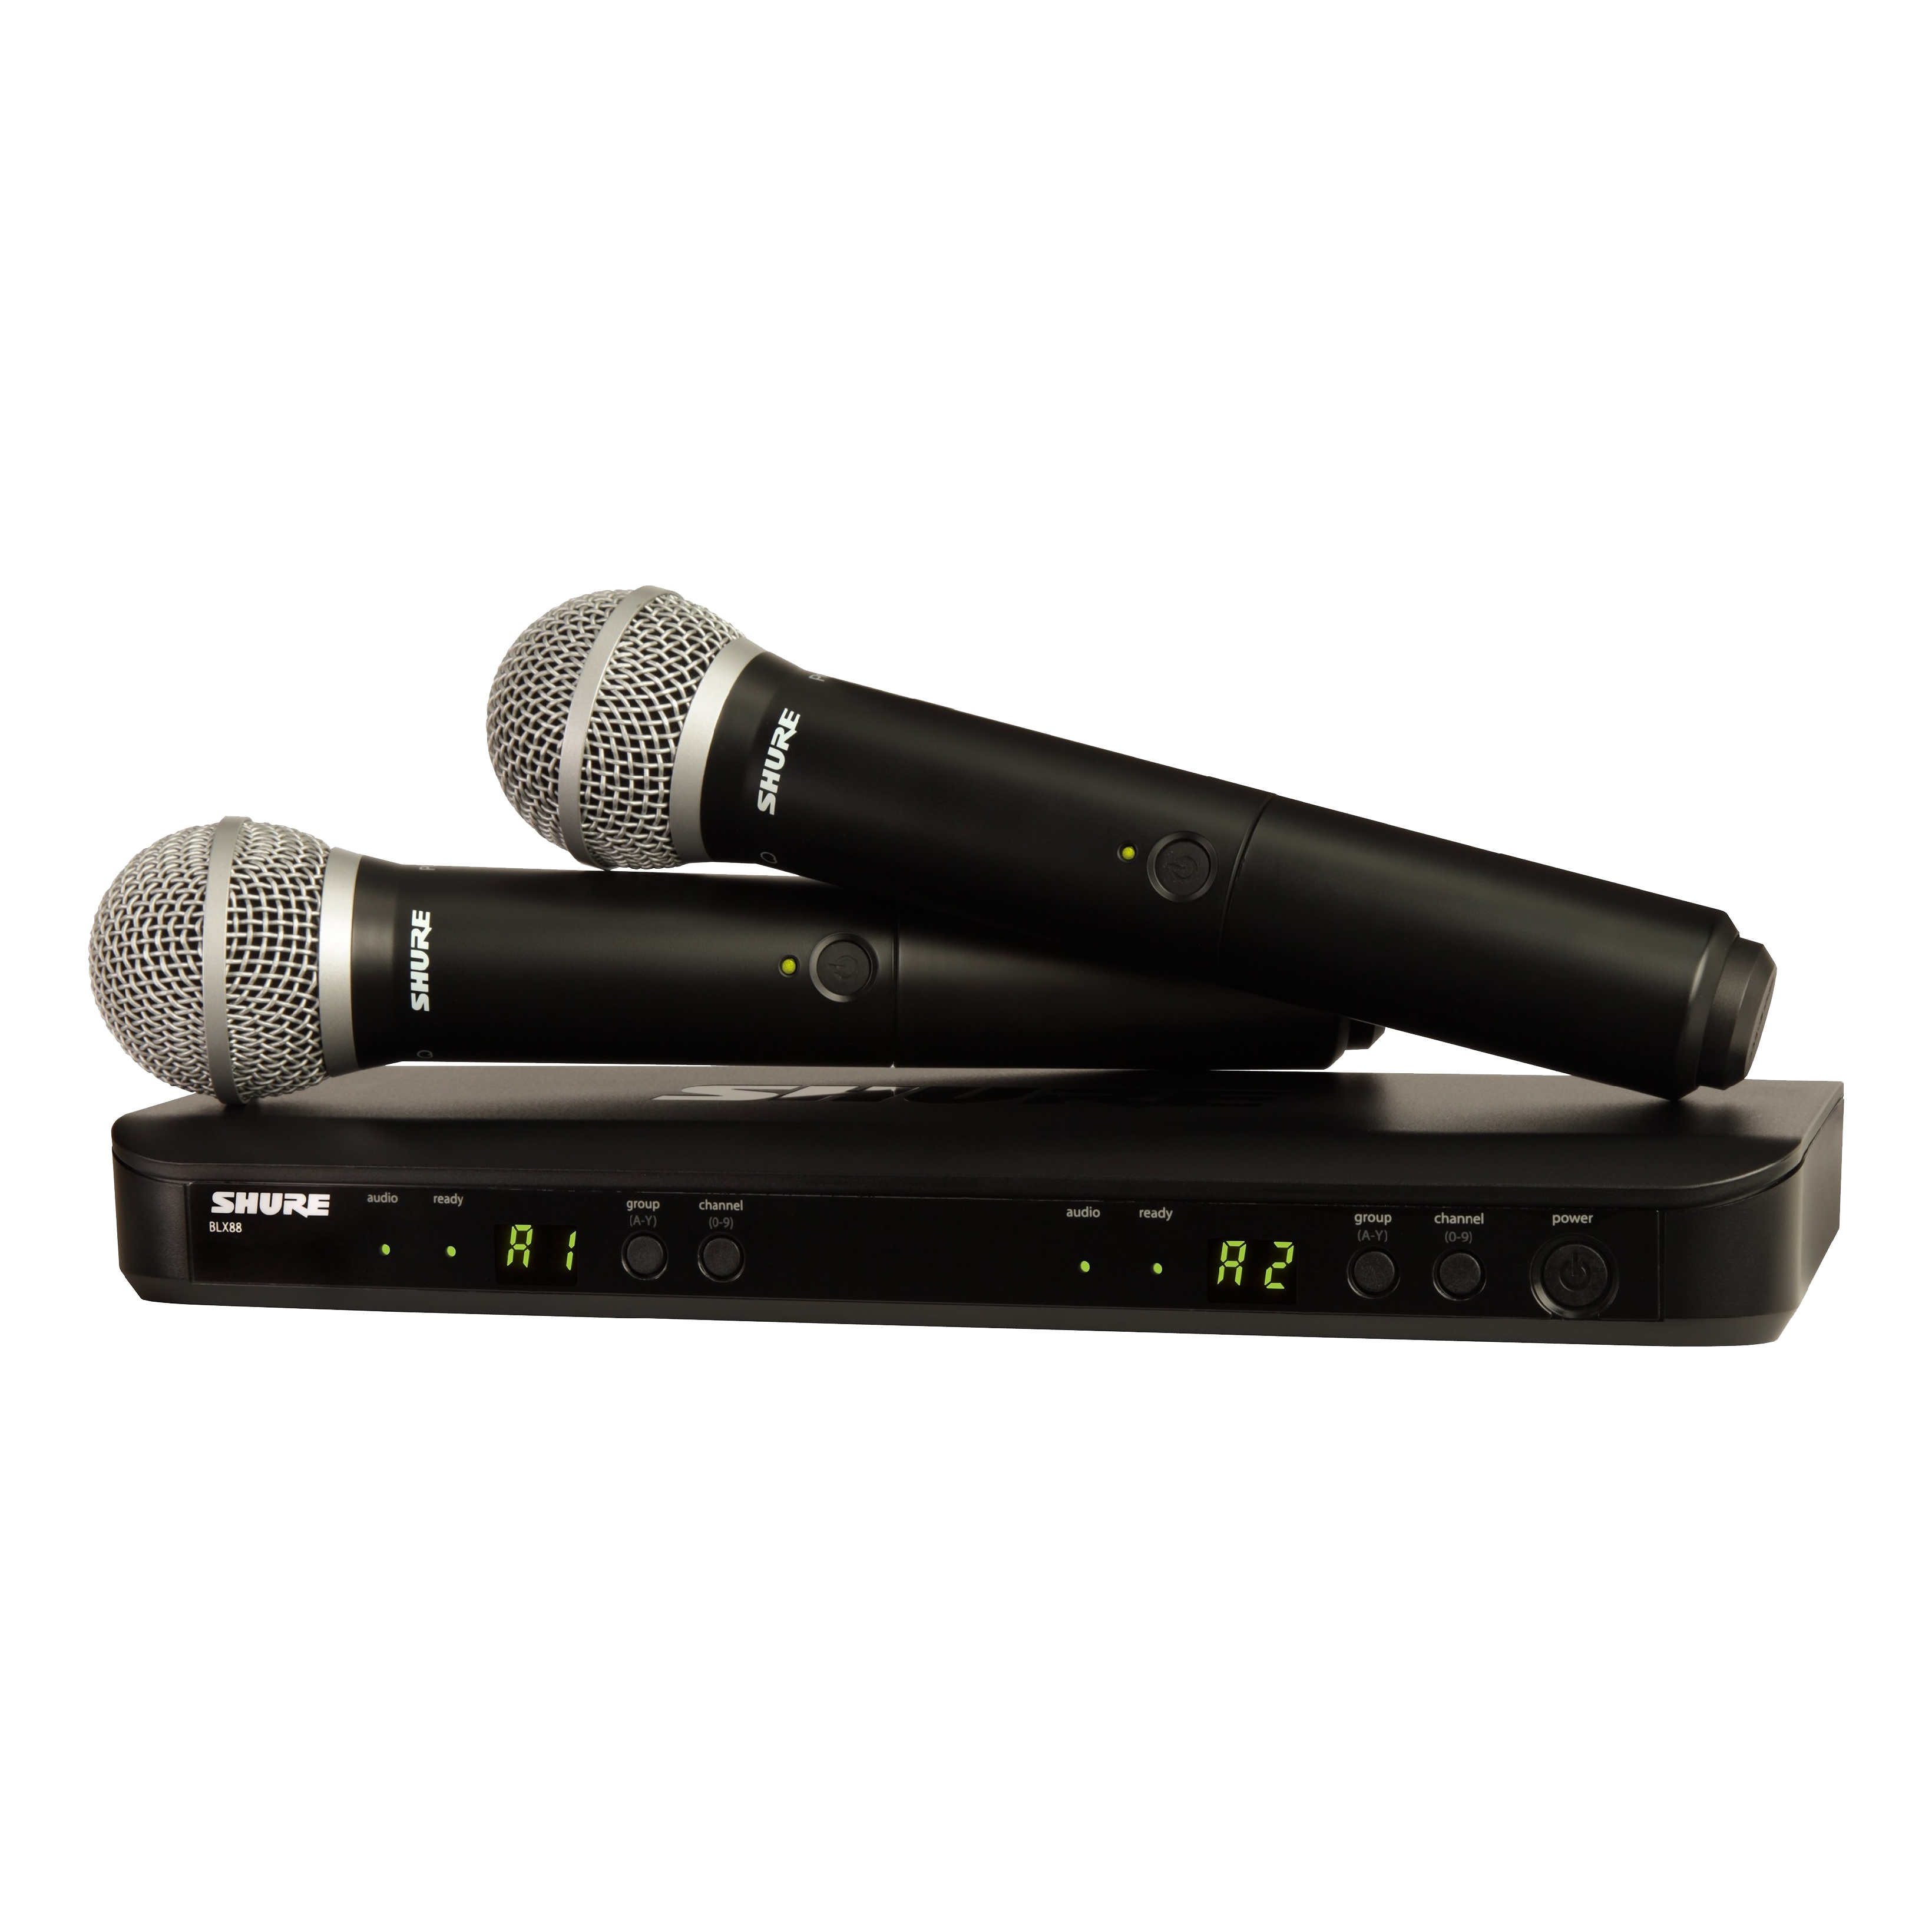 Shure BLX288/PG58 Dual Handheld Wireless Microphone System